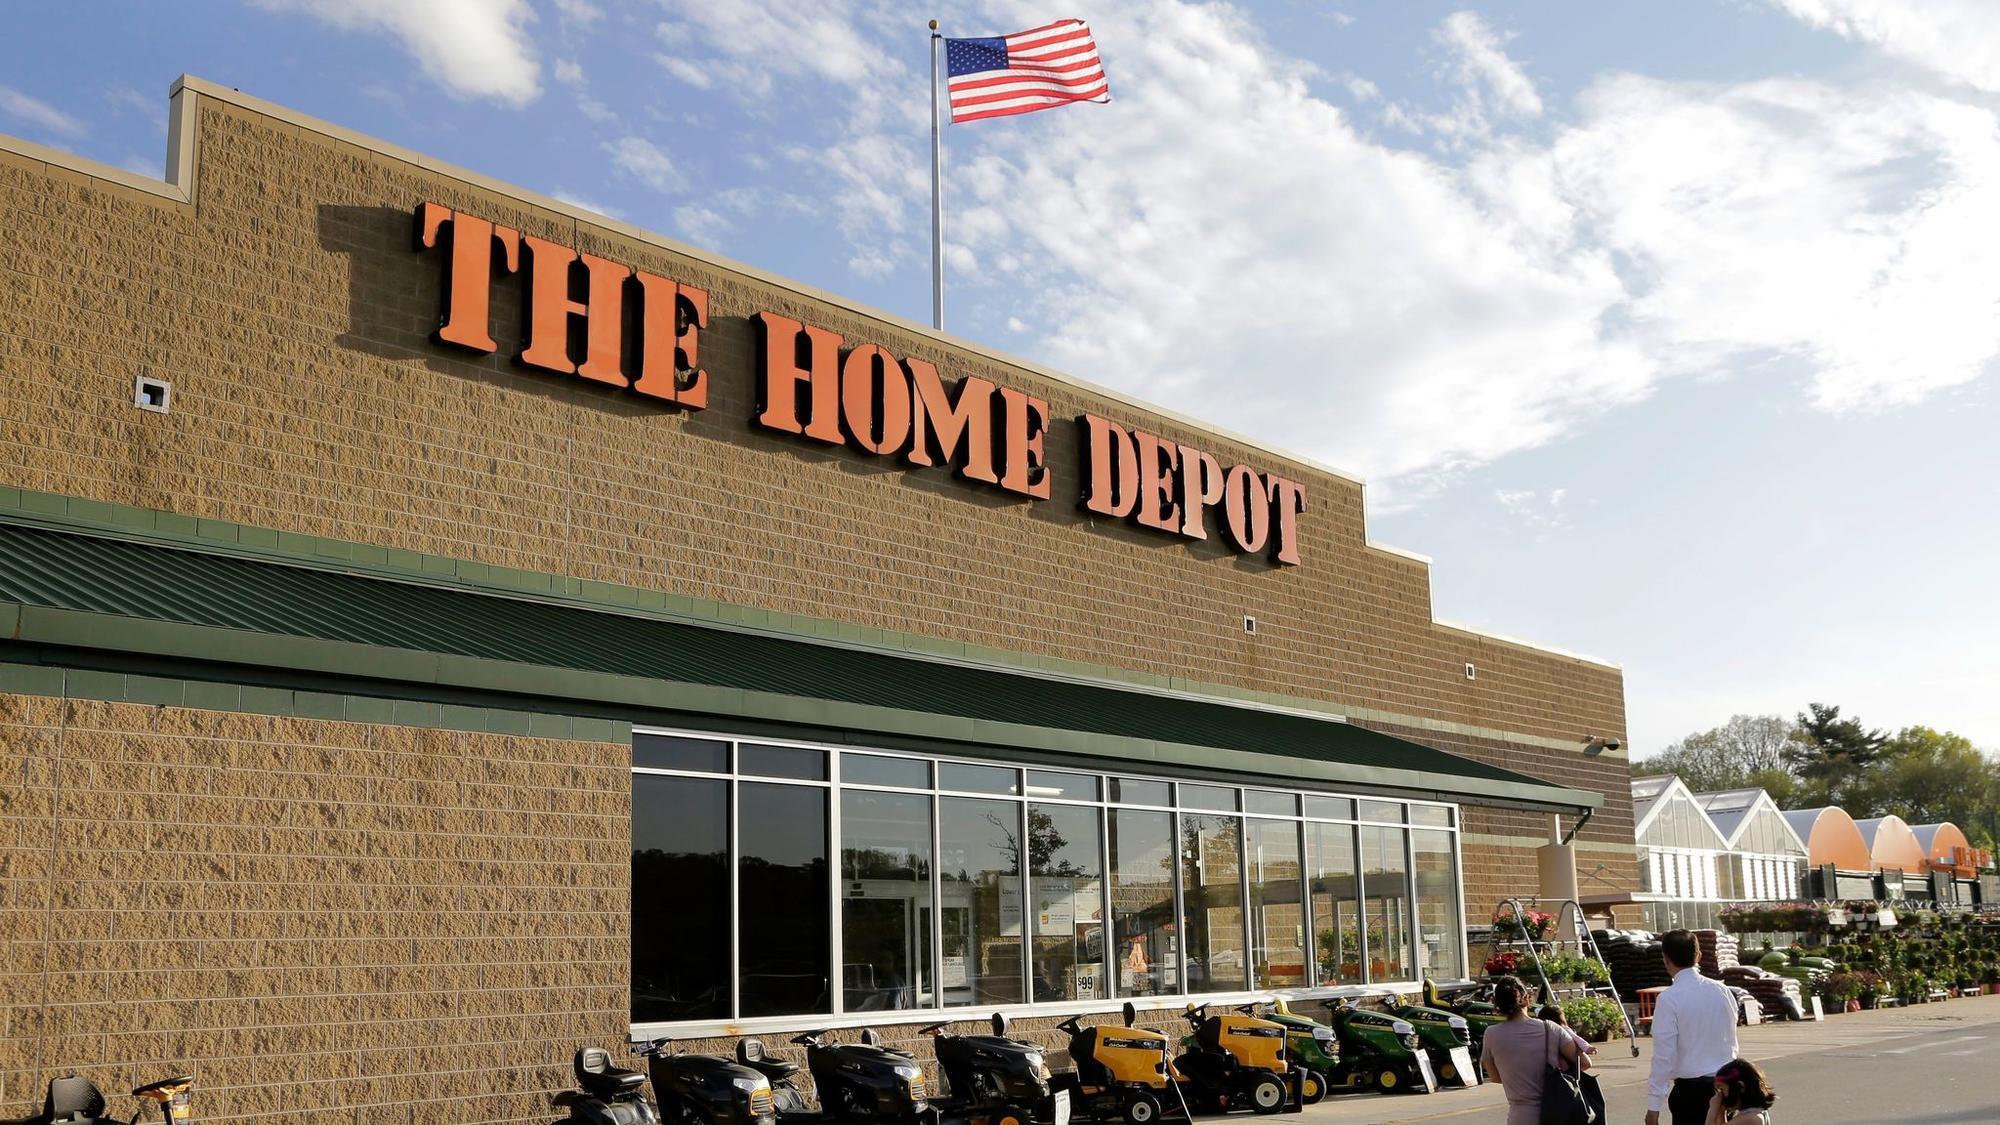 Home Depot's online push continues with purchase of The Company Store